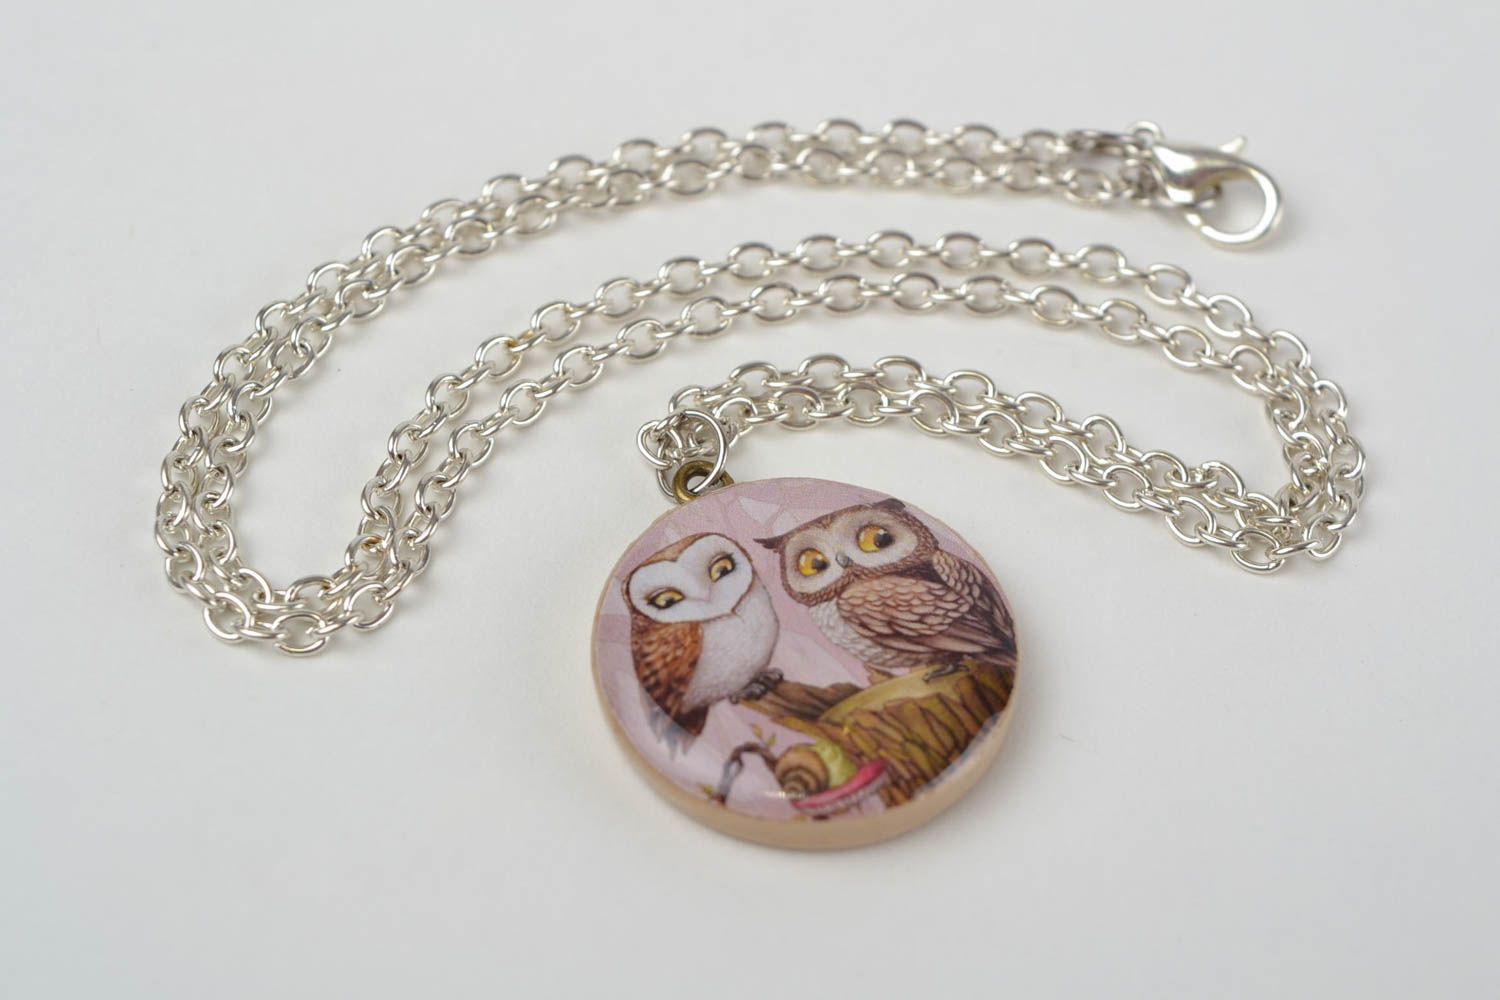 Handmade round decoupage polymer clay designer pendant with owls image on chain photo 5